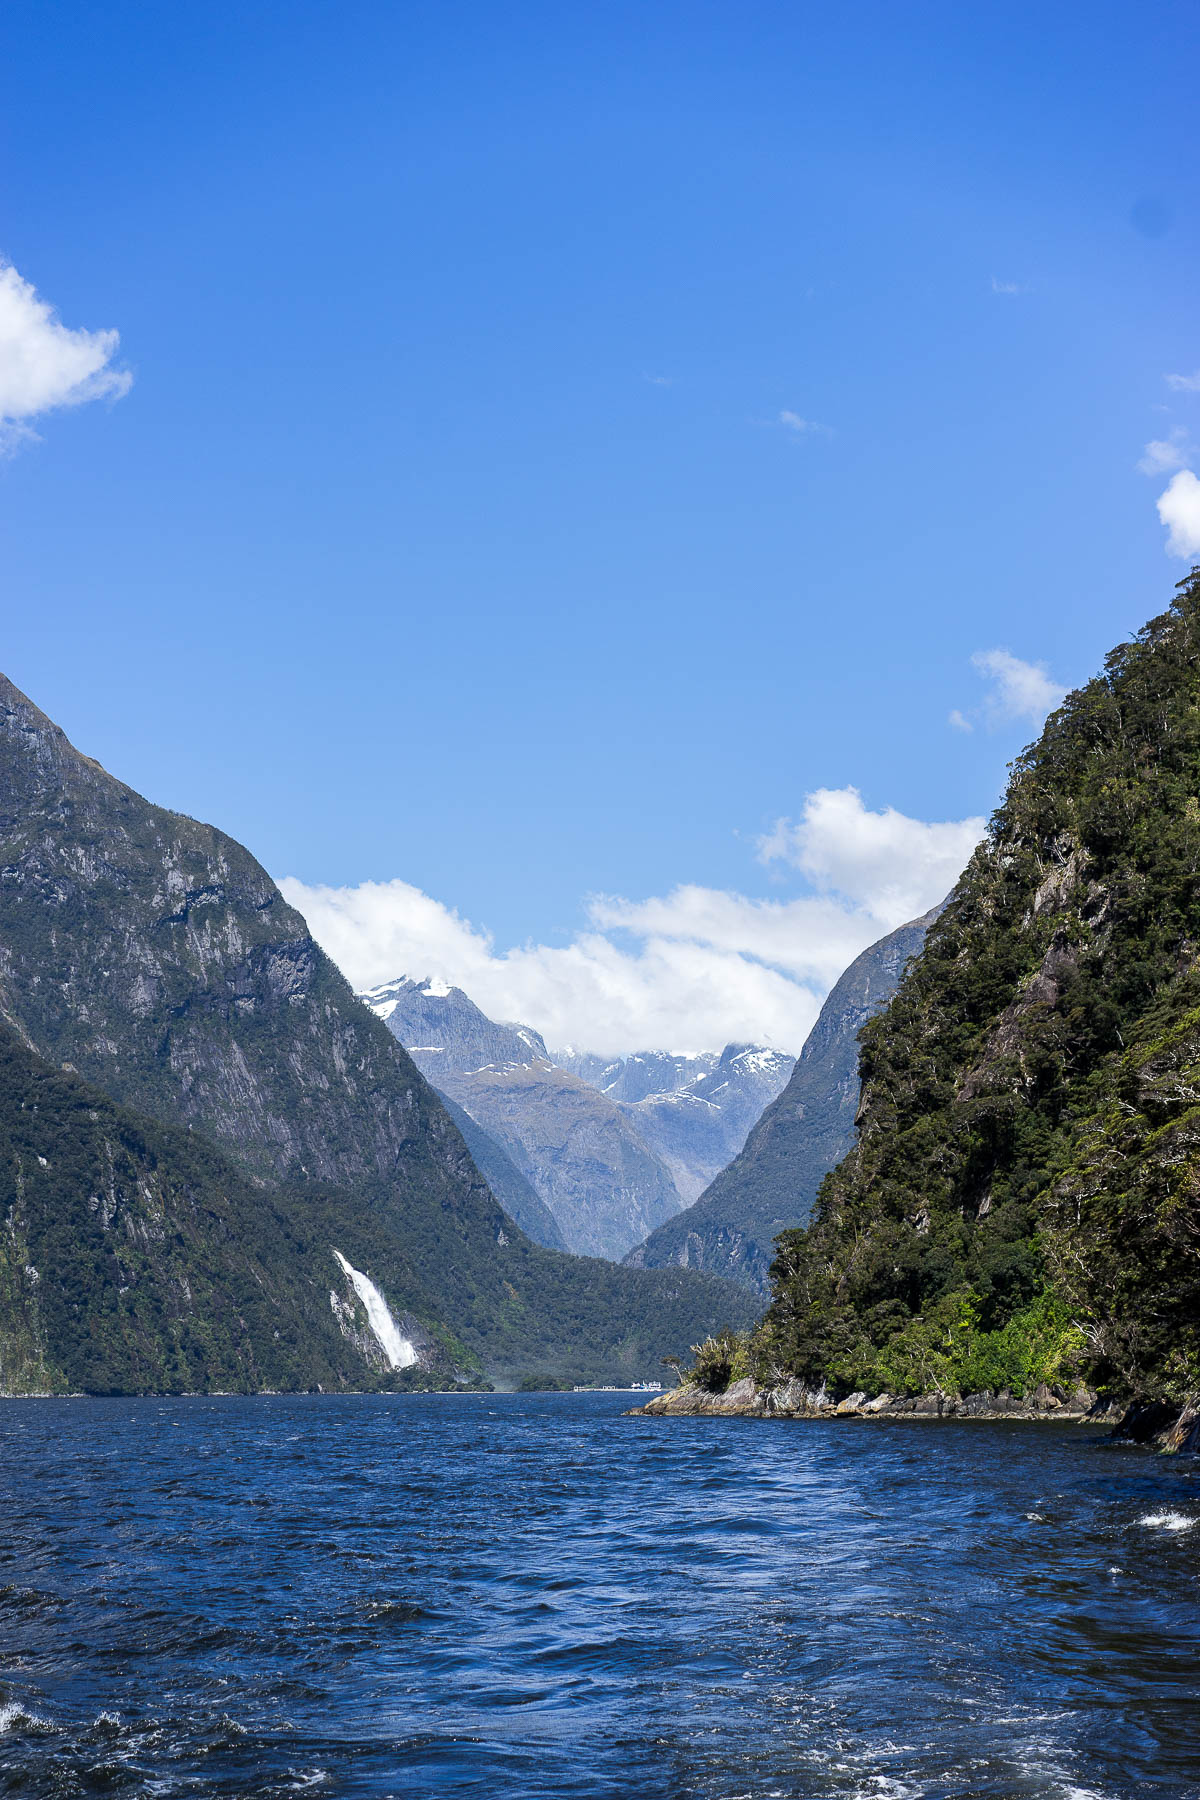 A Glam Lifestyle blogger Amanda takes in waterfalls at Milford Sound fiord on cruise in New Zealand